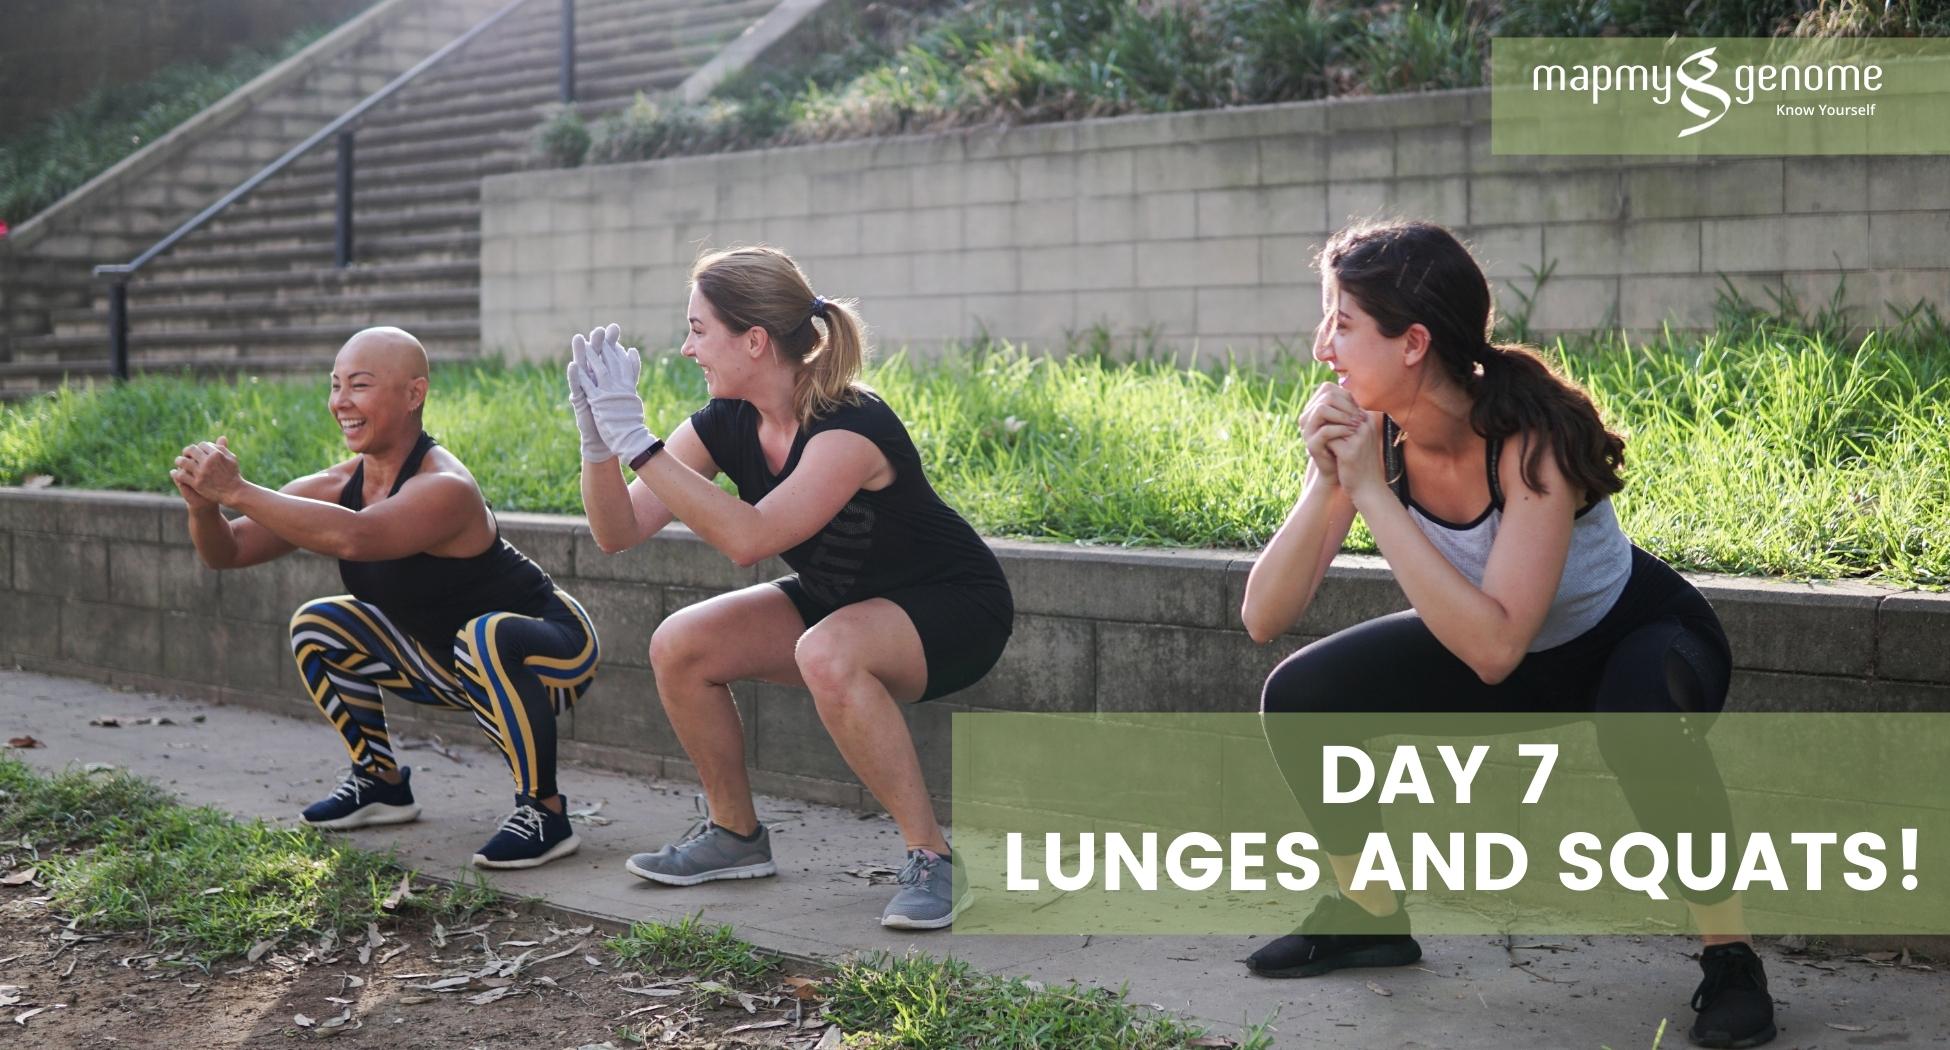 Day 7 is for Lunges and Squats!